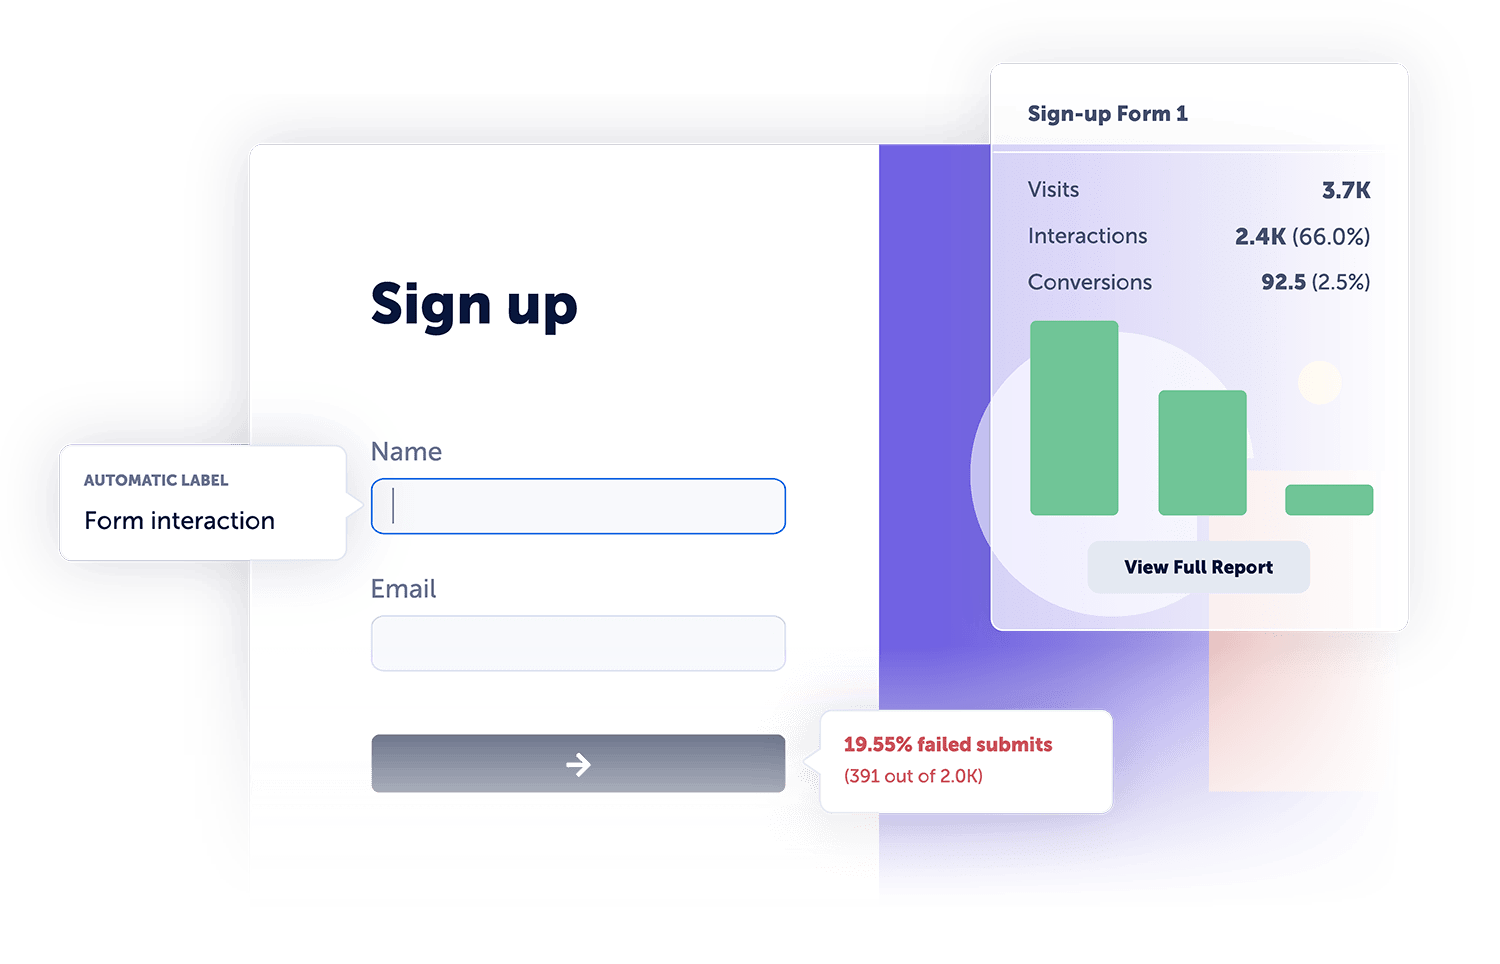 A sign-up screen with a form showcasing how Mouseflow detects form interactions, submit failures and much more.